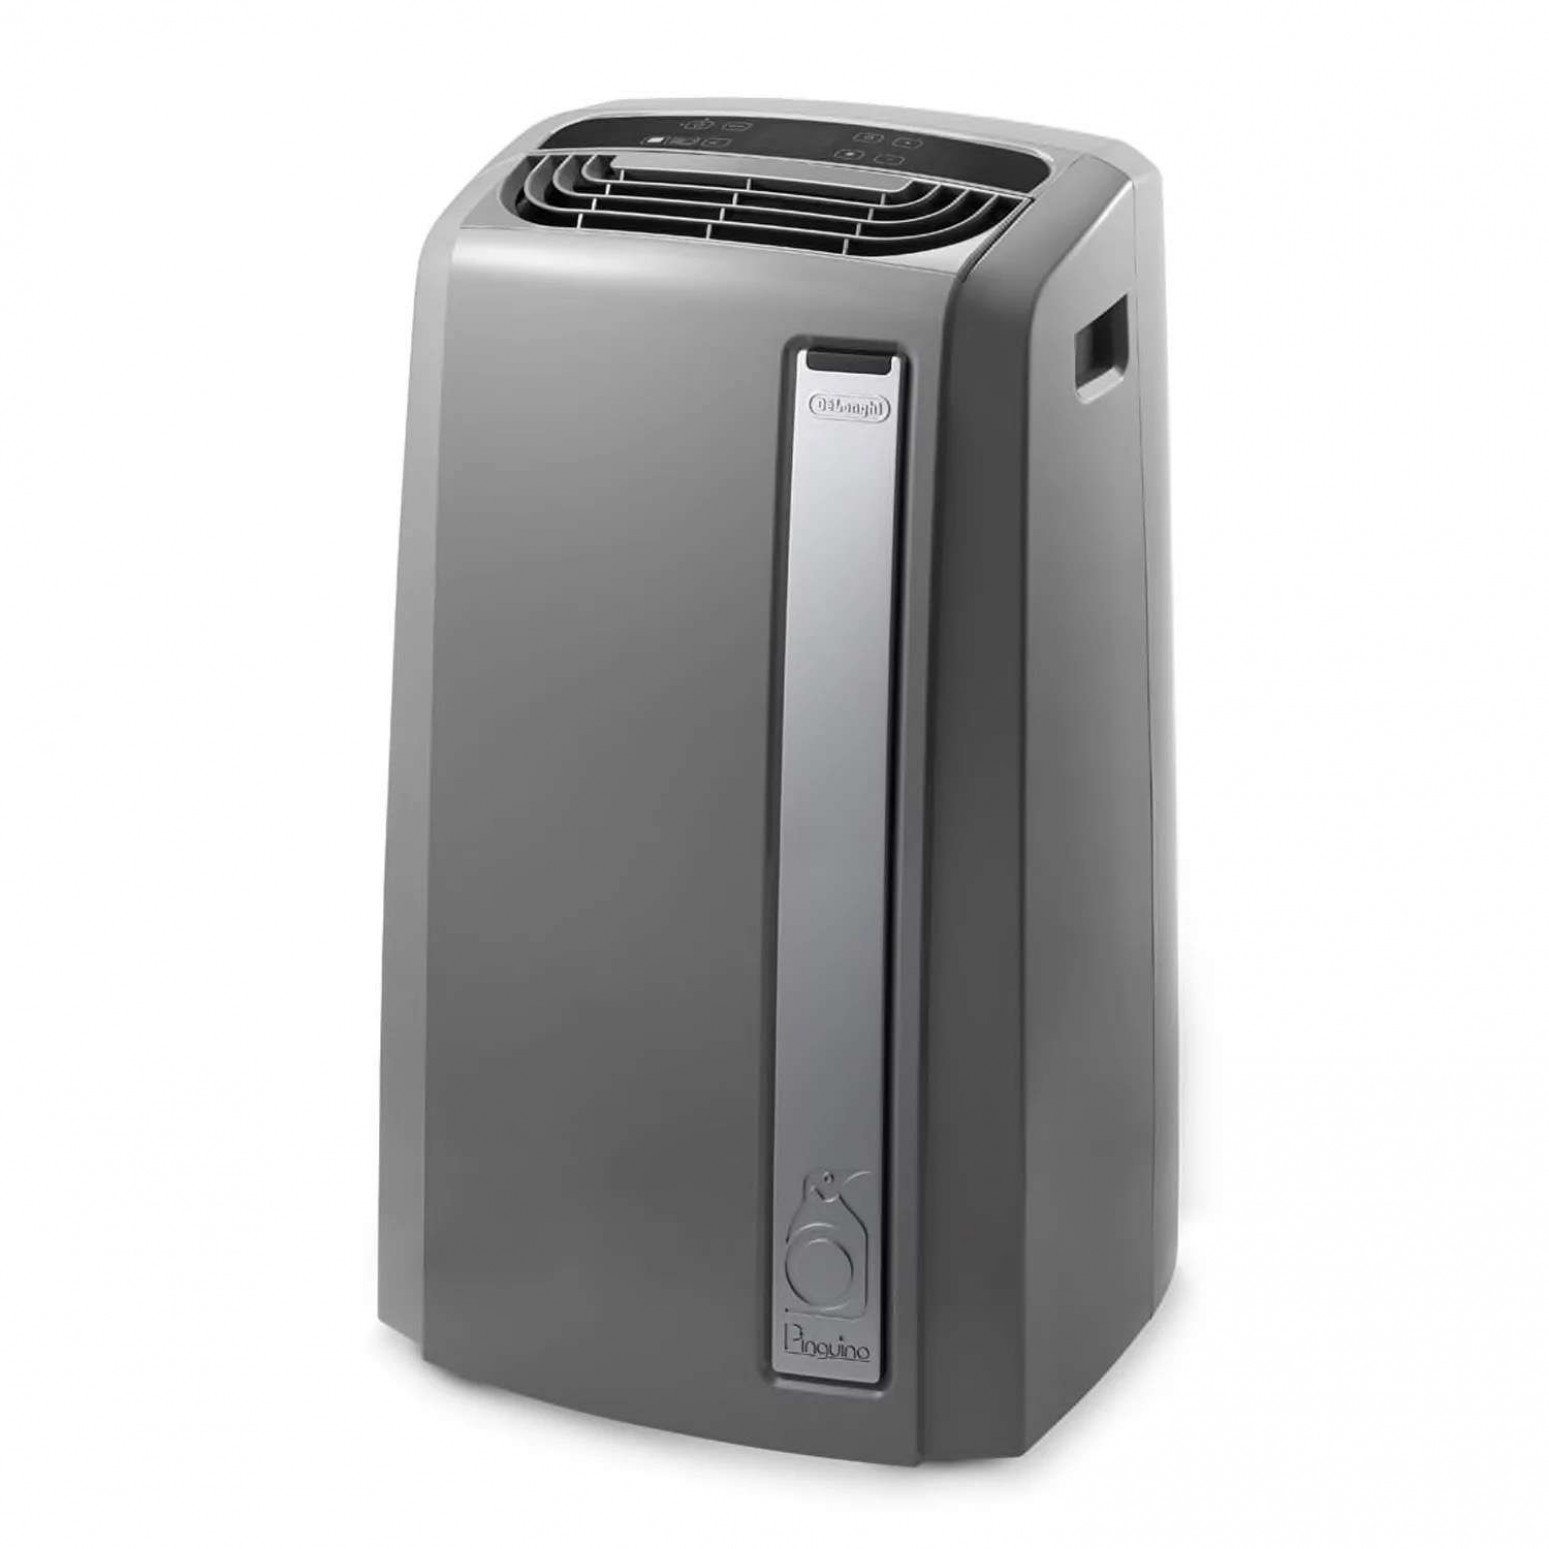 What Is The Best Small Portable Ac